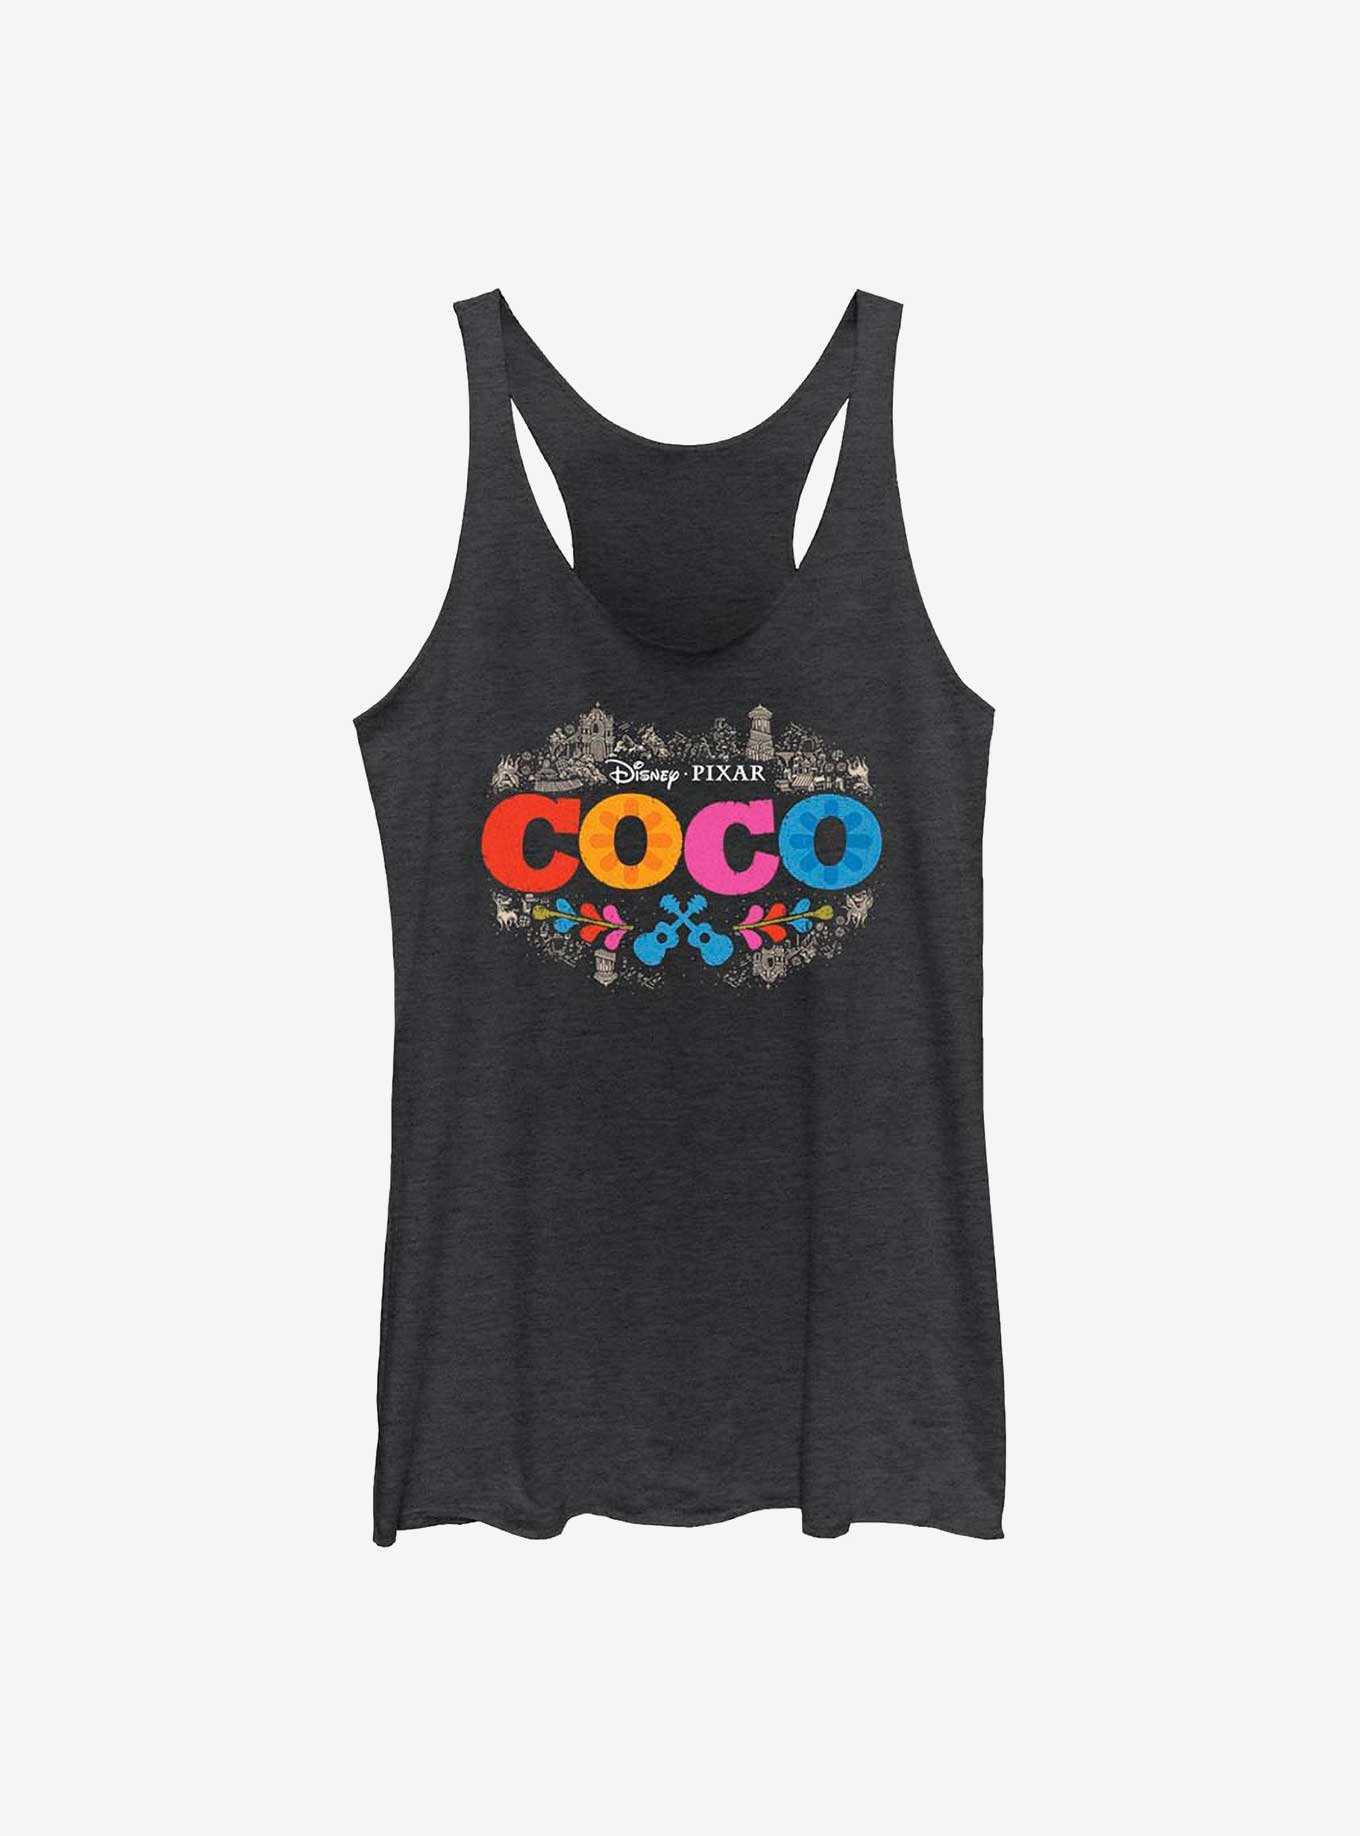 OFFICIAL Coco Shirts & Merchandise